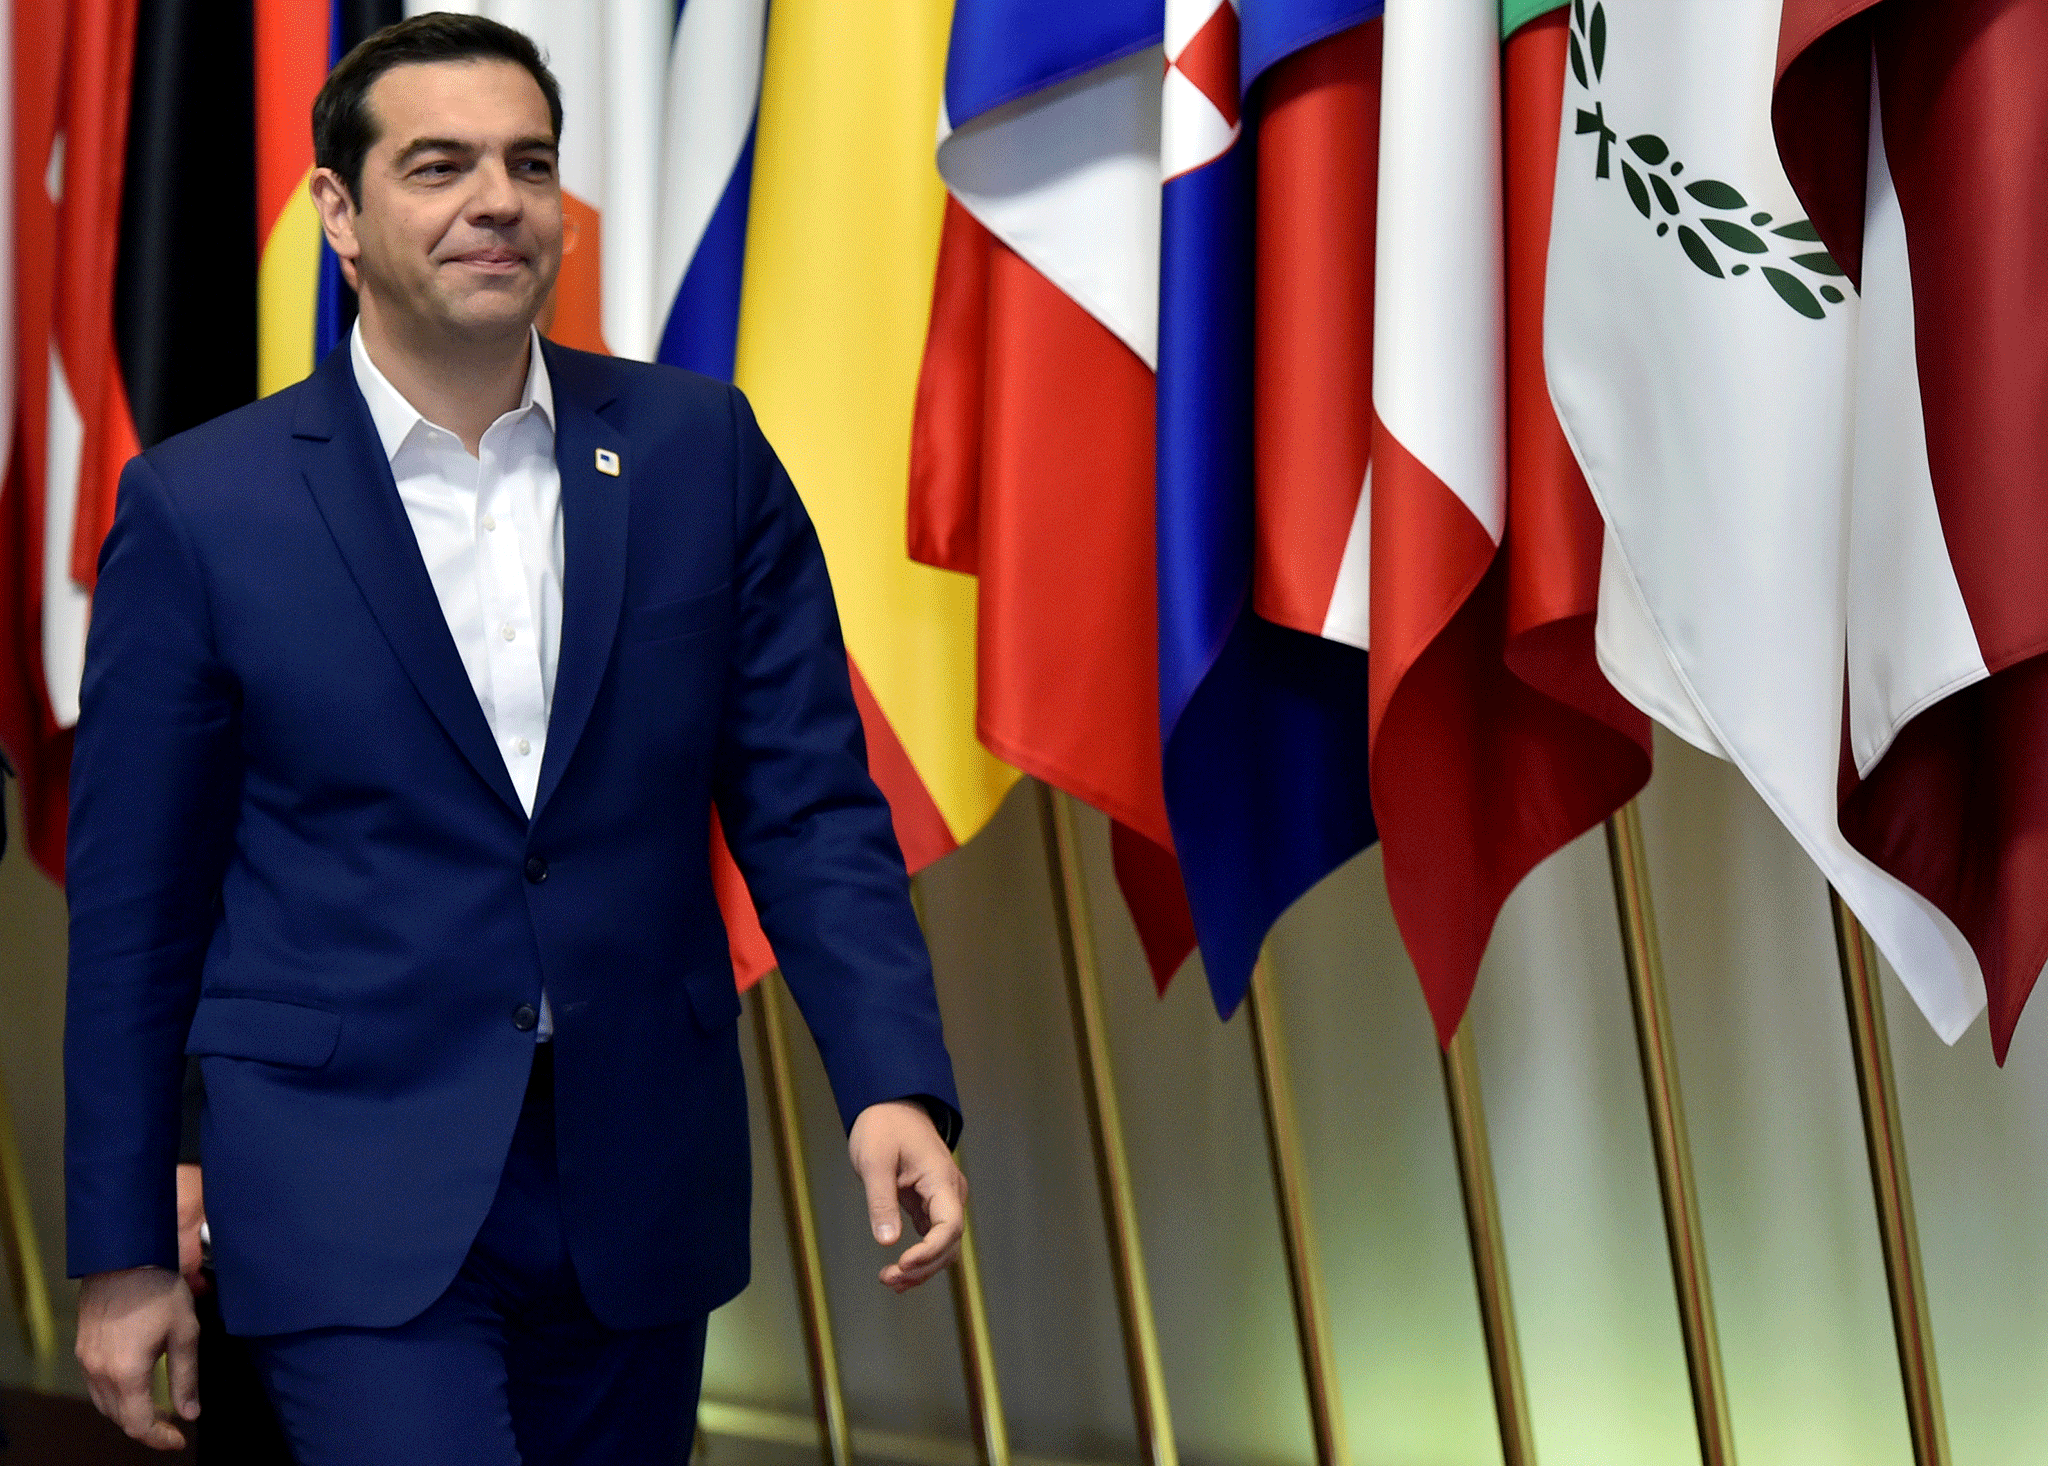 Tsipras’ support of Maduro ignores Greece’s painful history